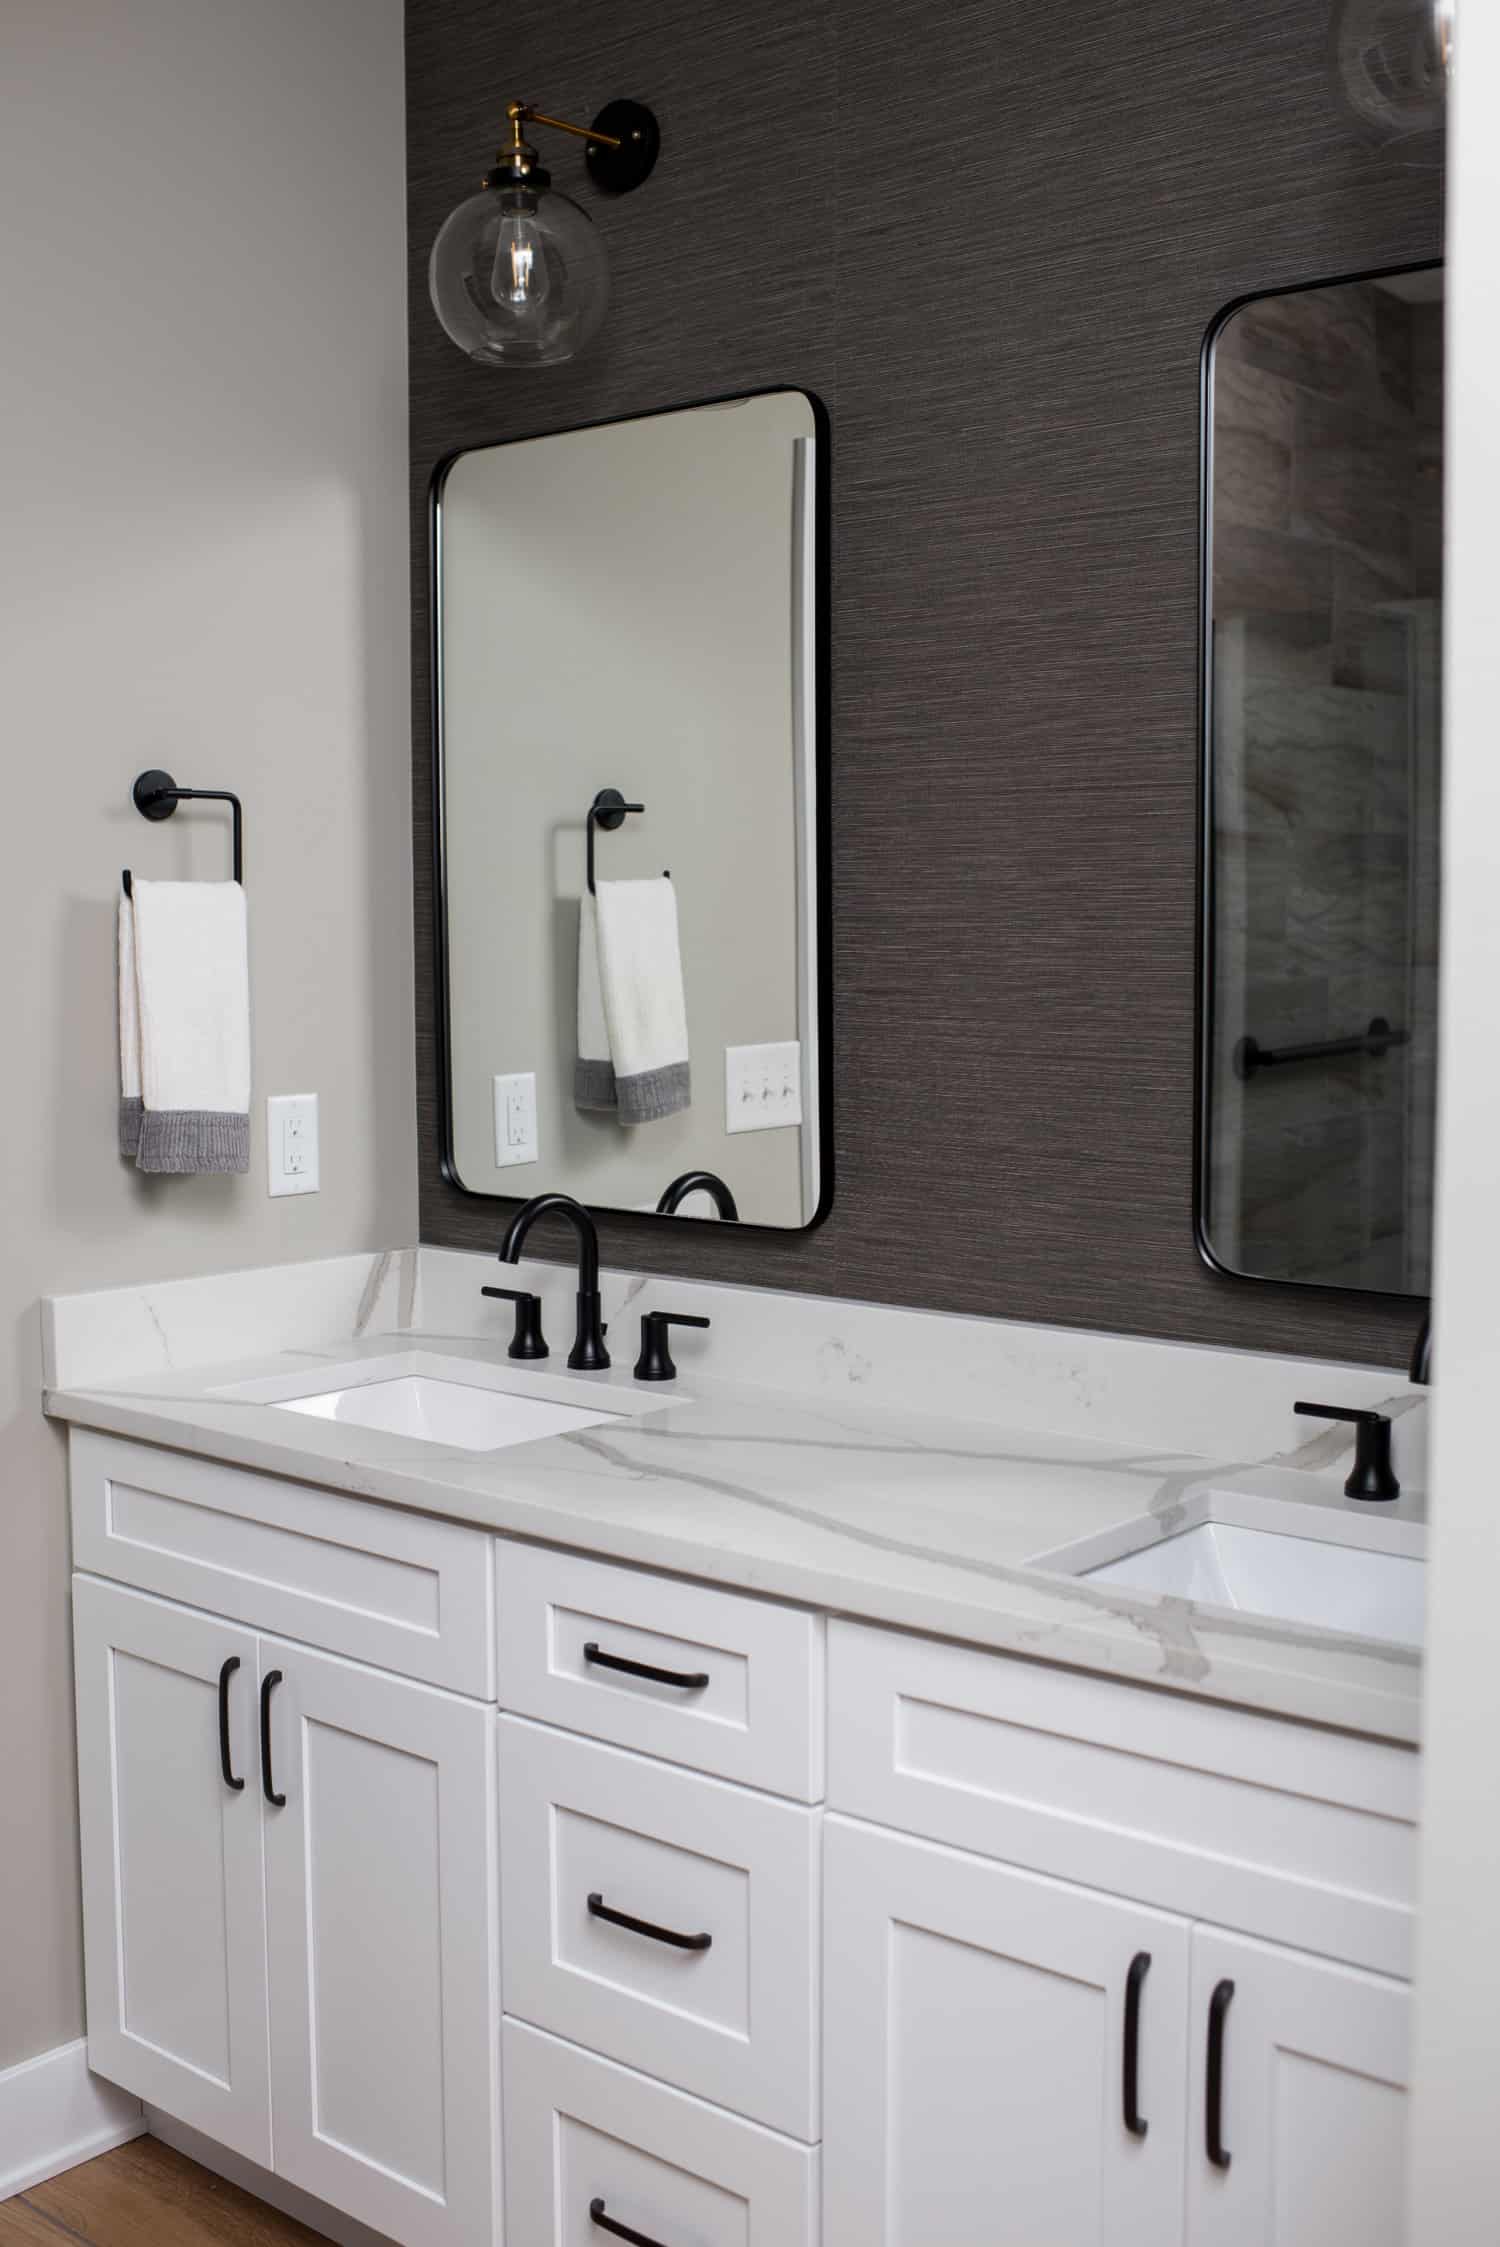 Nicholas Design Build | A modern bathroom with two sinks and a contemporary mirror.